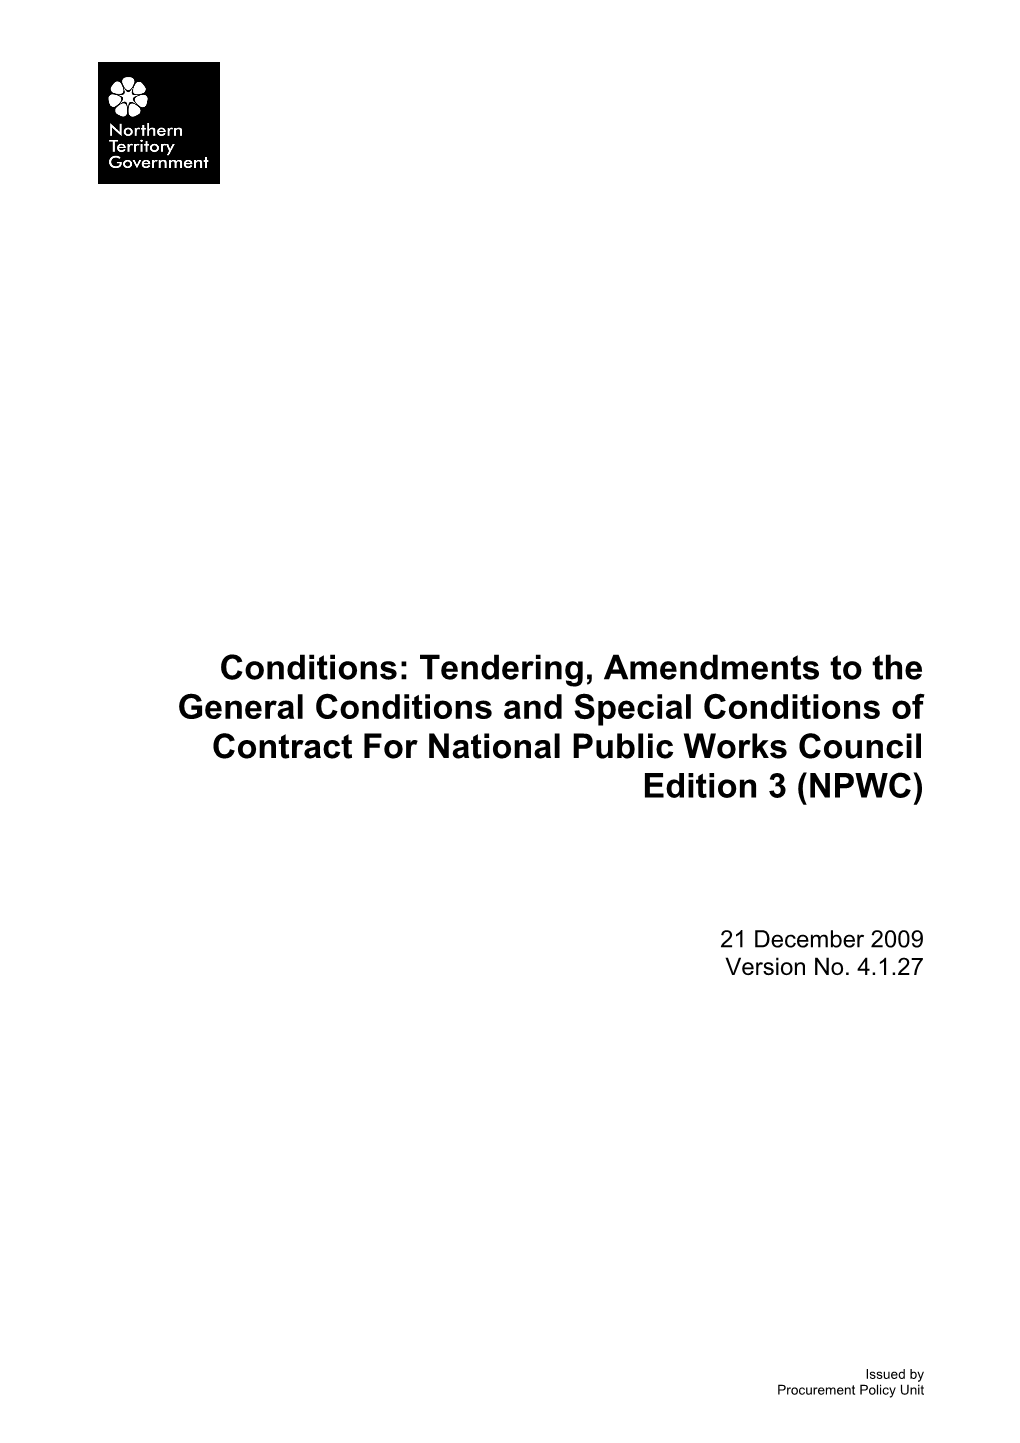 Amendments to General and Special Conditions of Contract NPWC - (V 4.1.27) (21 December 2009)